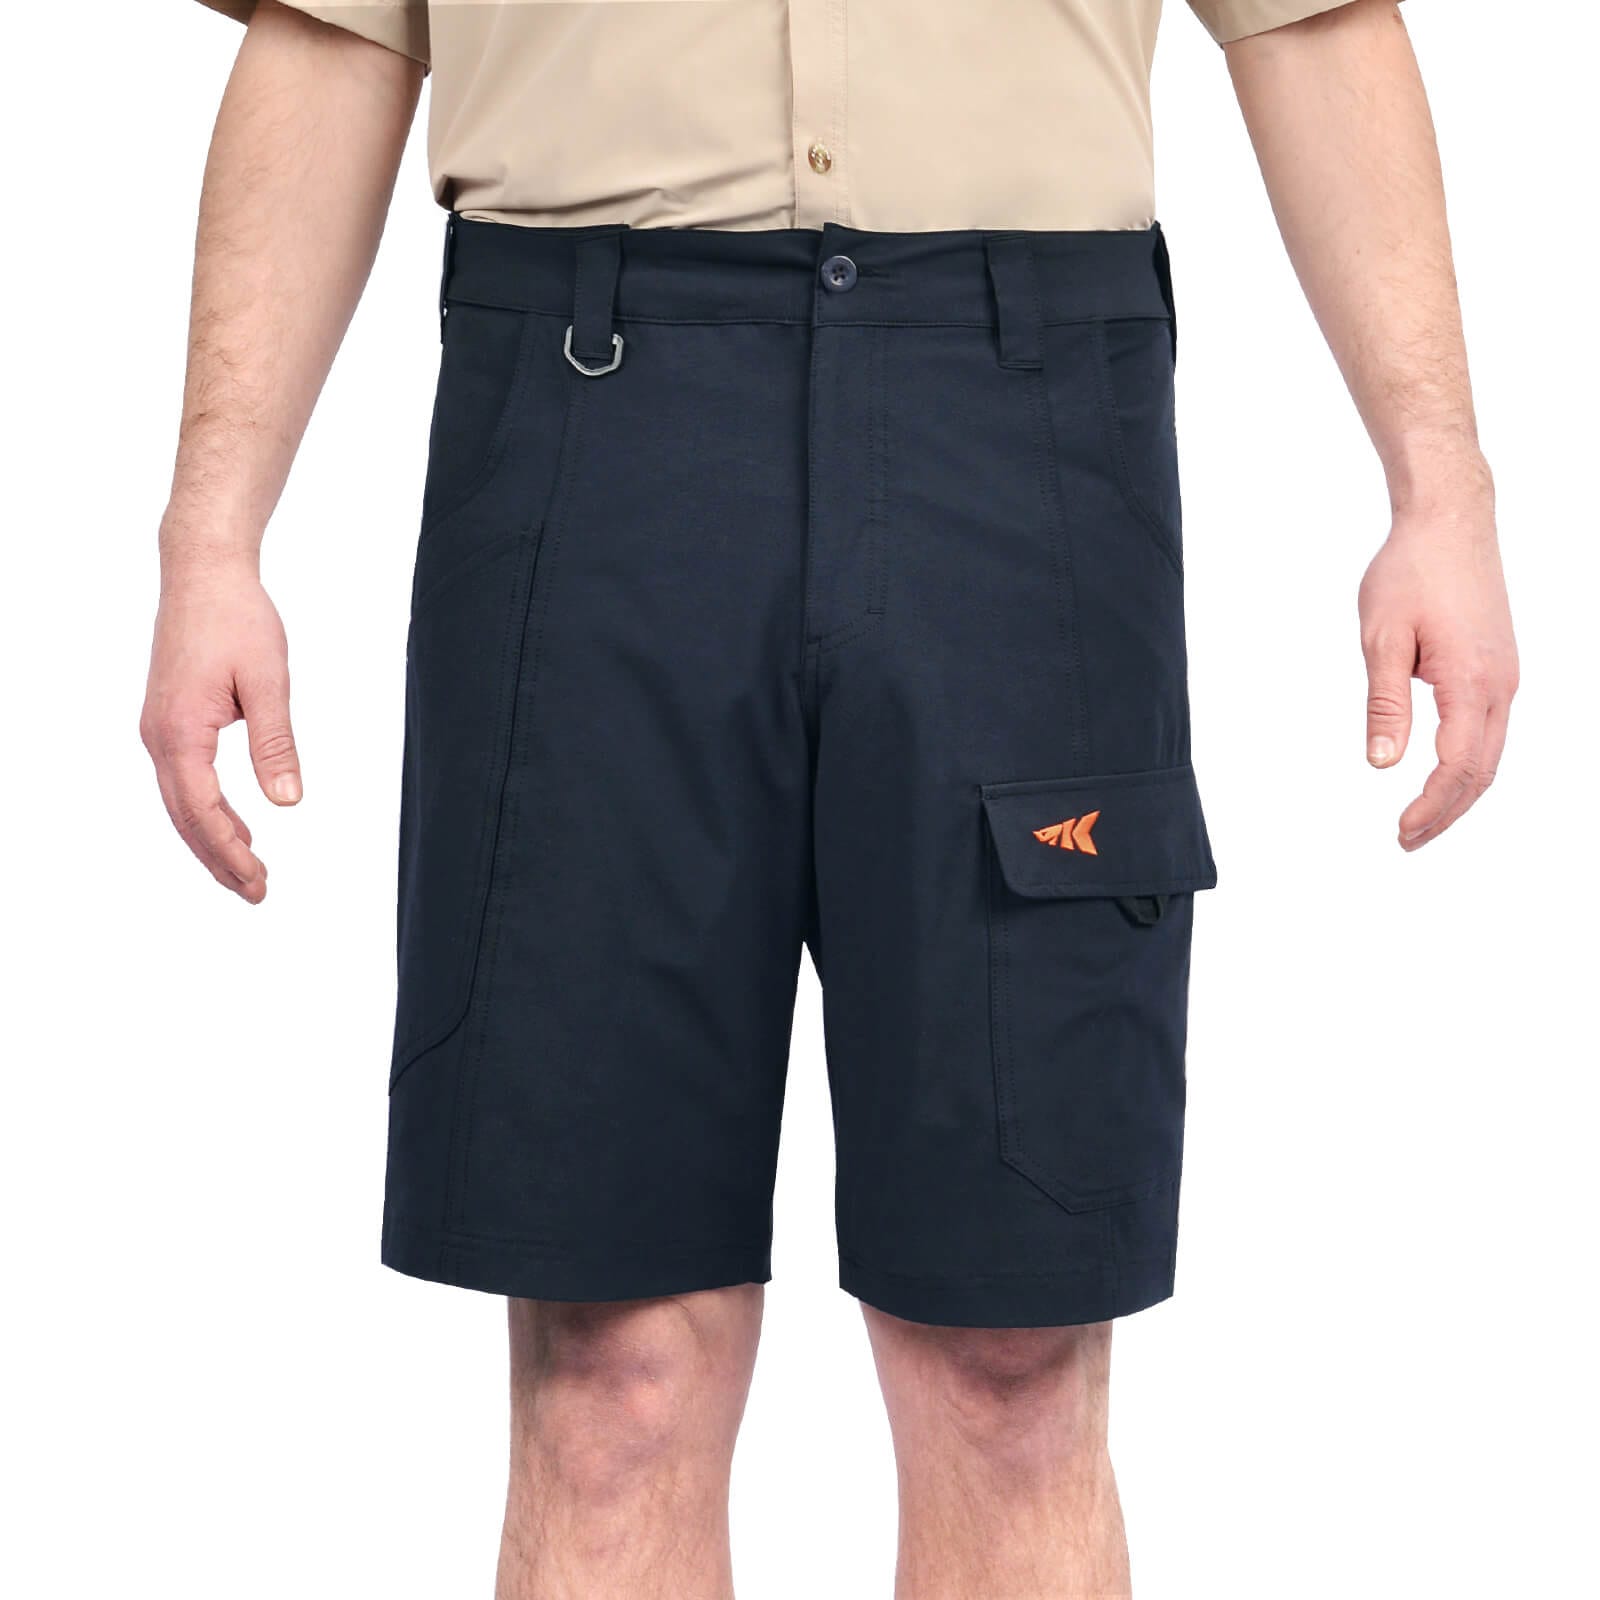 Quick Dry Hiking Shorts Men's Cargo Casual Outdoor Shorts 4-Way